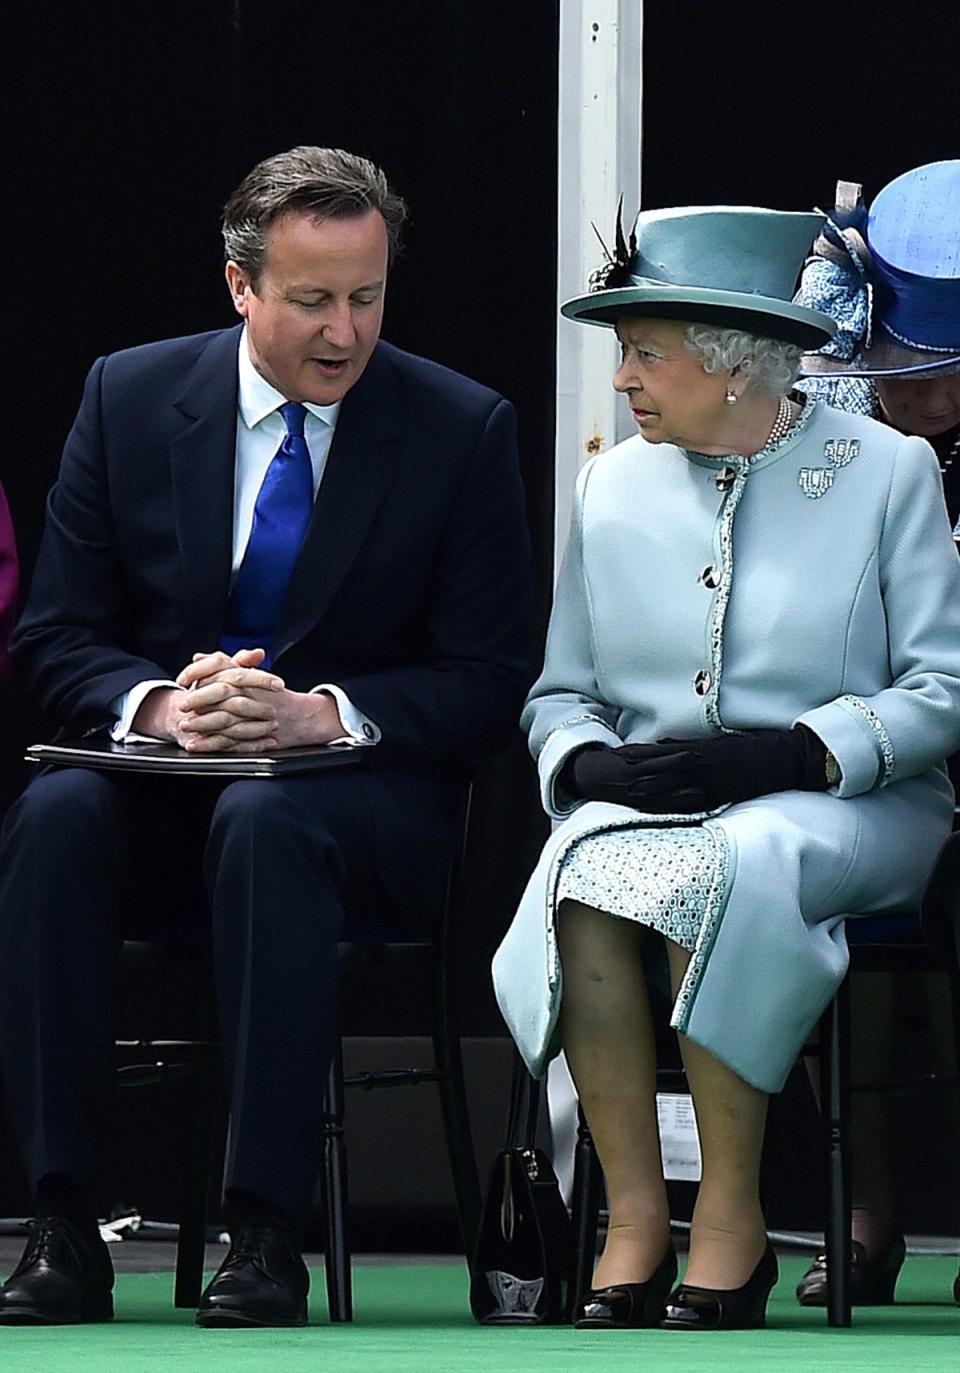 David Cameron and the Queen attending a Magna Carta 800th anniversary commemoration event in 2015 (Ben Stansall/PA) (PA Wire)